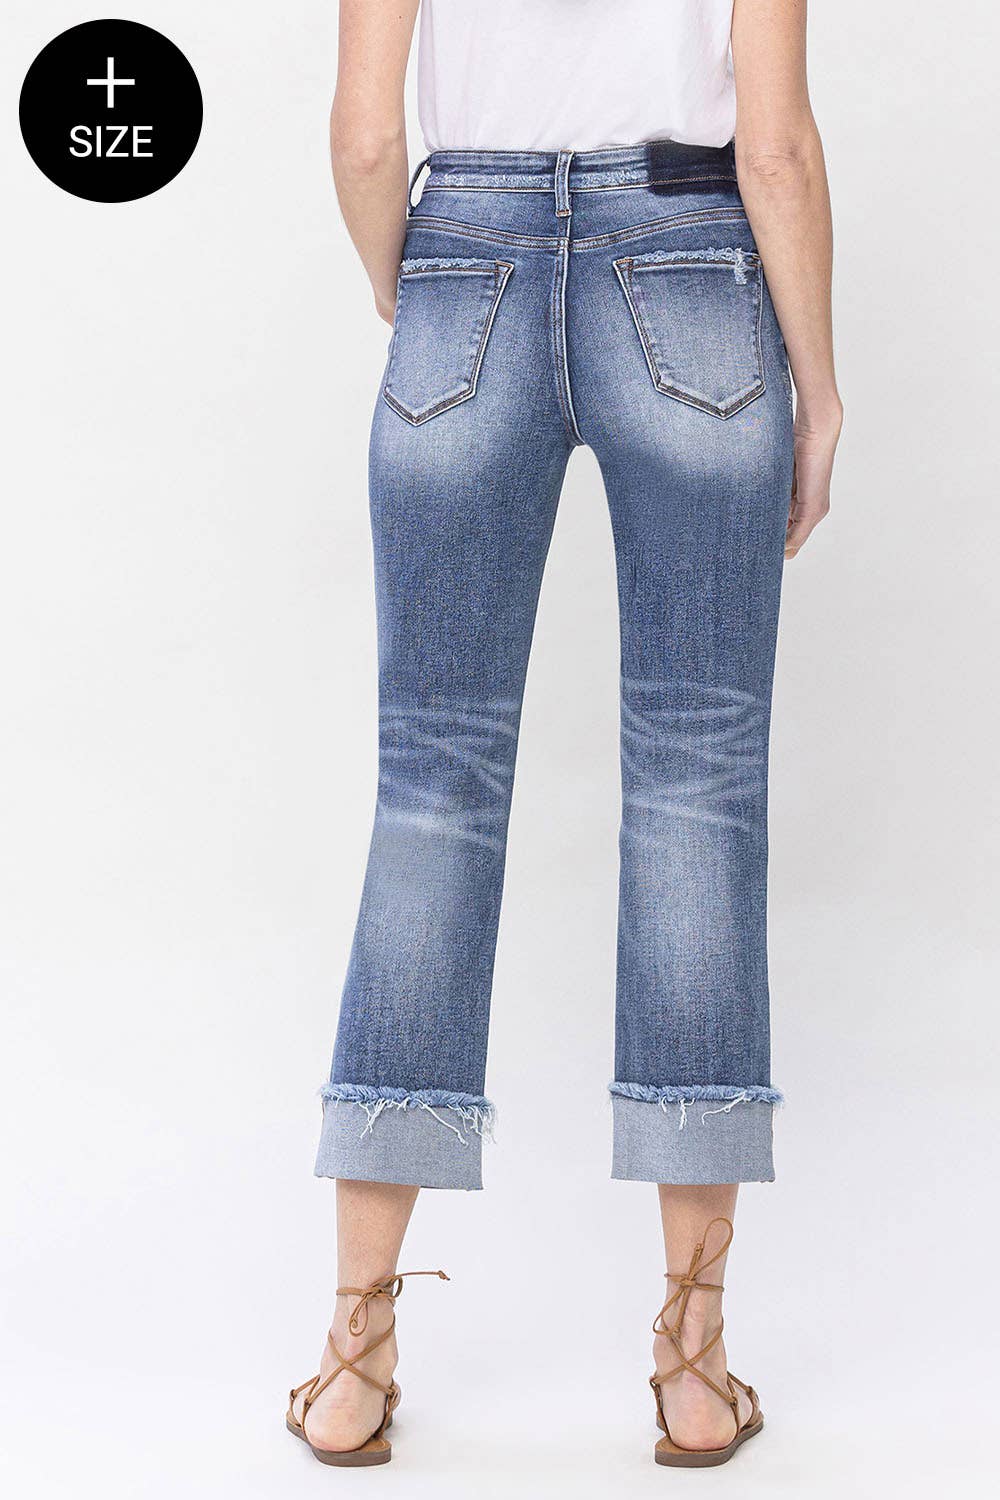 Infallible High Rise Cuffed Jeans by Lovervet